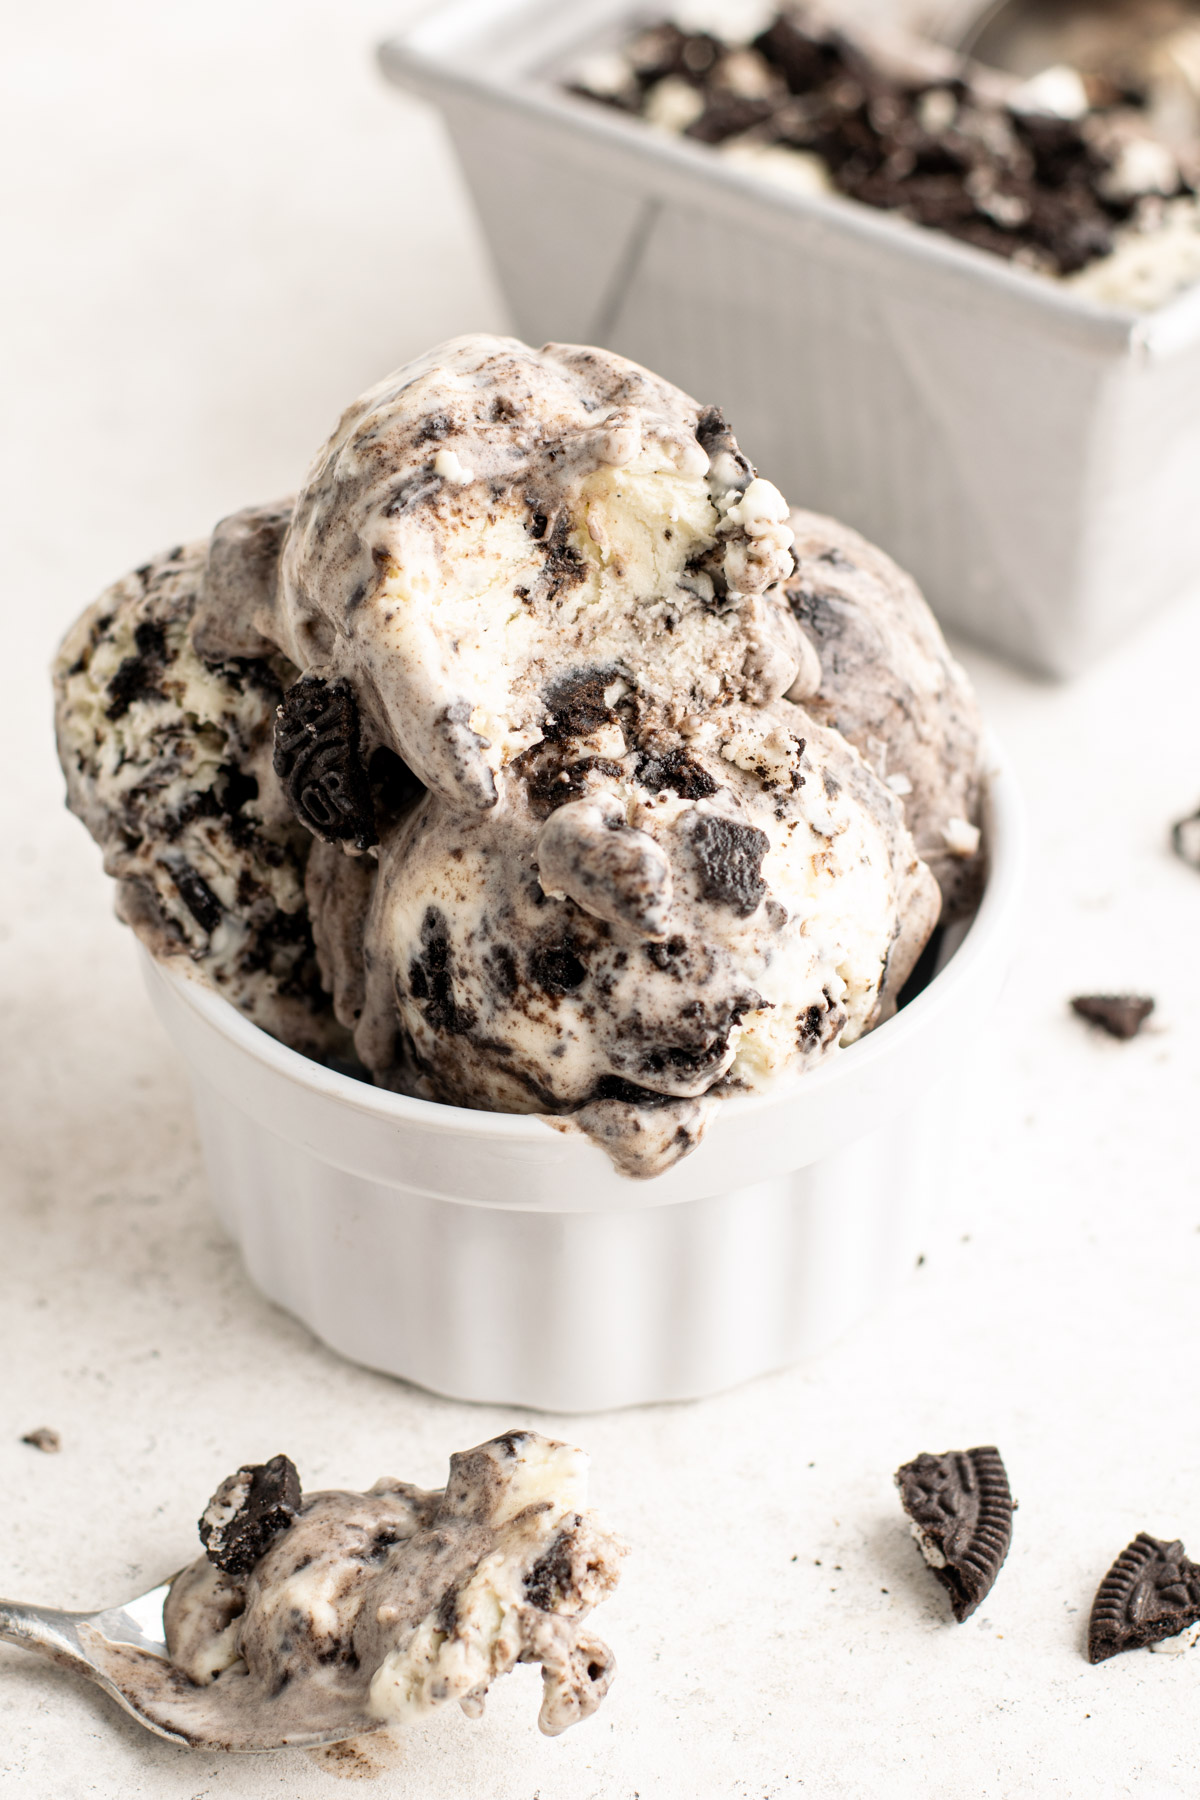 scoops of cookies and cream ice cream in a white ramekin with a spoon infront.